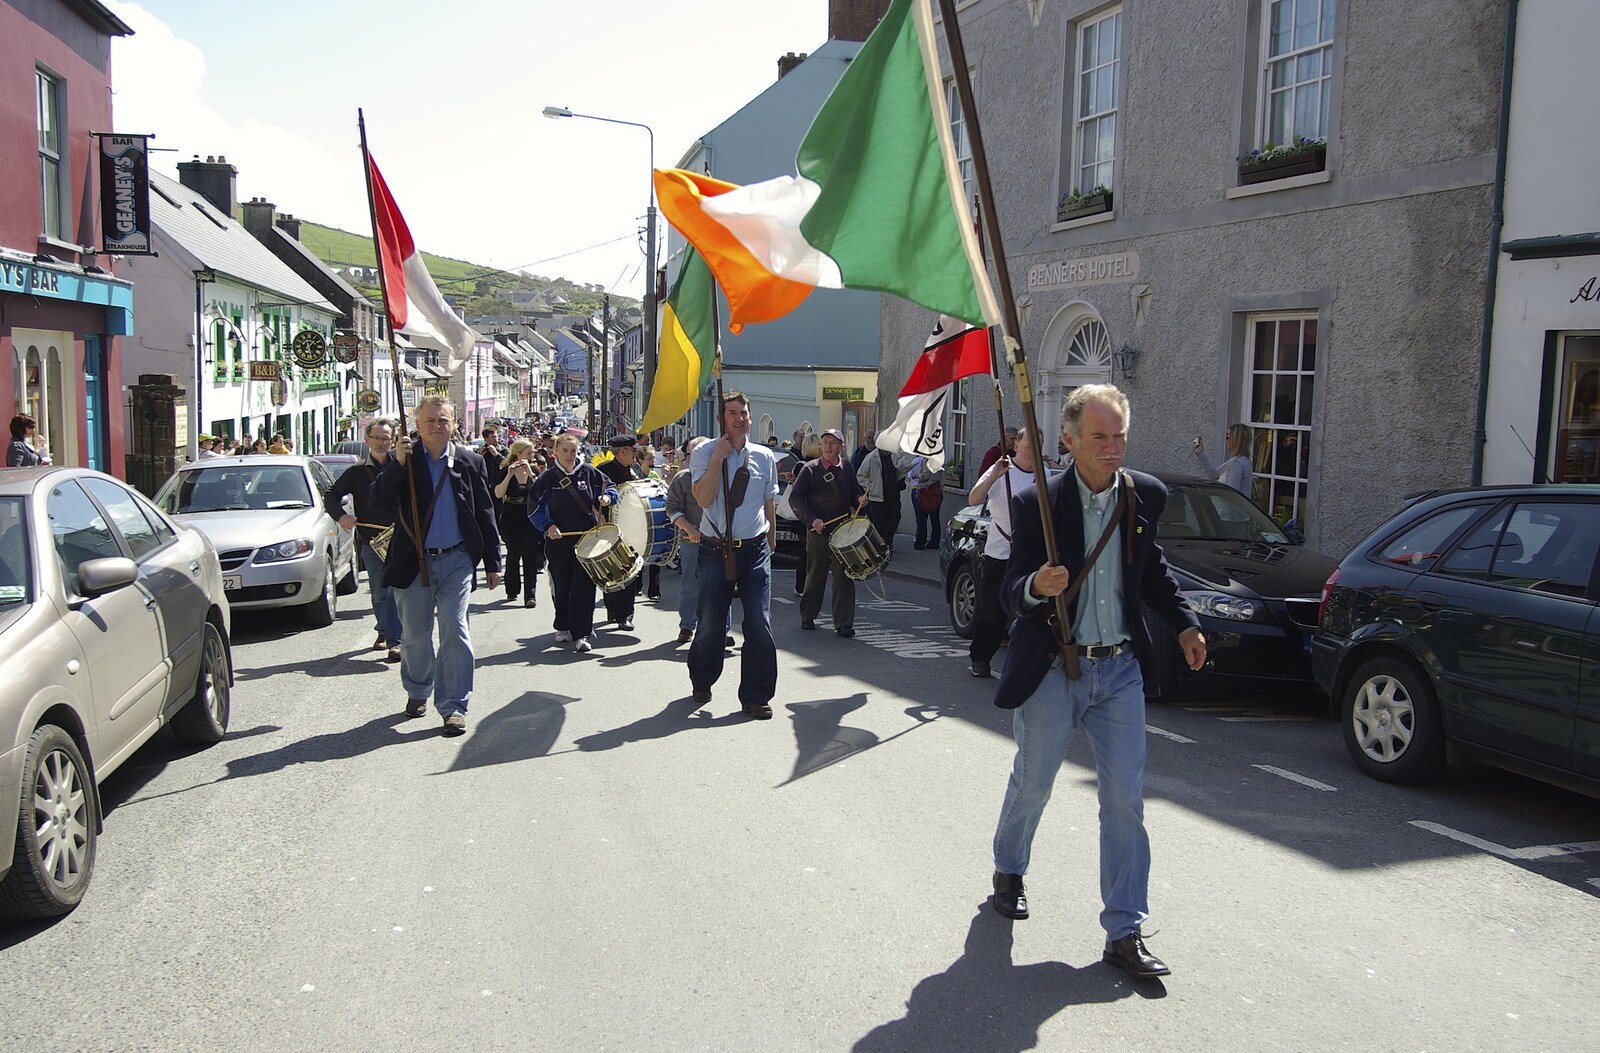 Connor Pass, Slea Head and Dingle, County Kerry, Ireland - 4th May 2008: Main Street in Derry has a parade